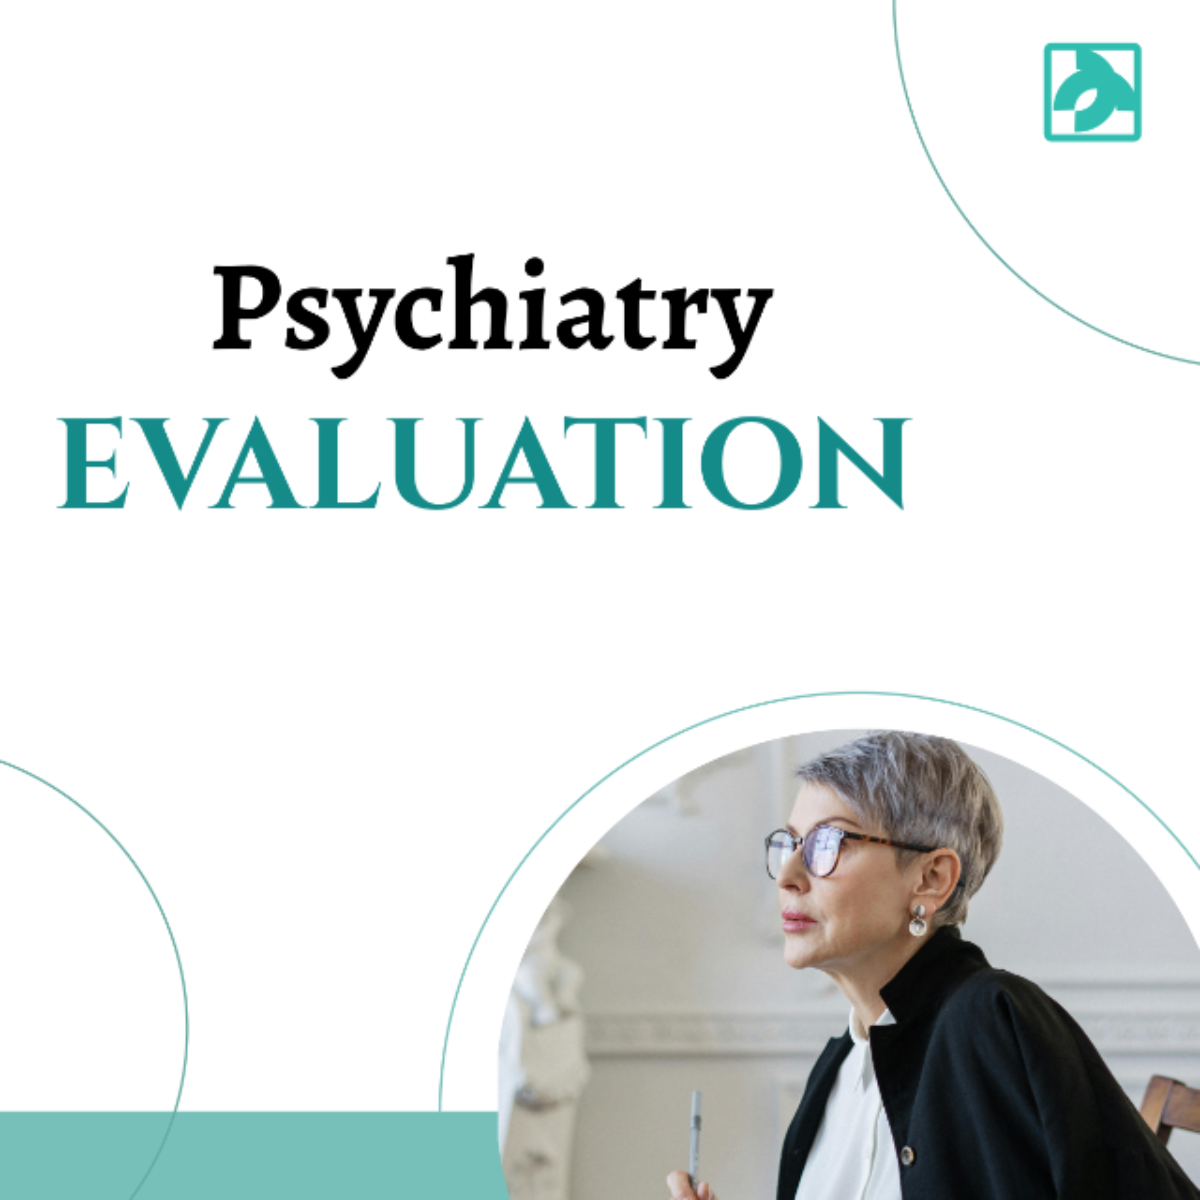 Psychiatry Evaluation Template